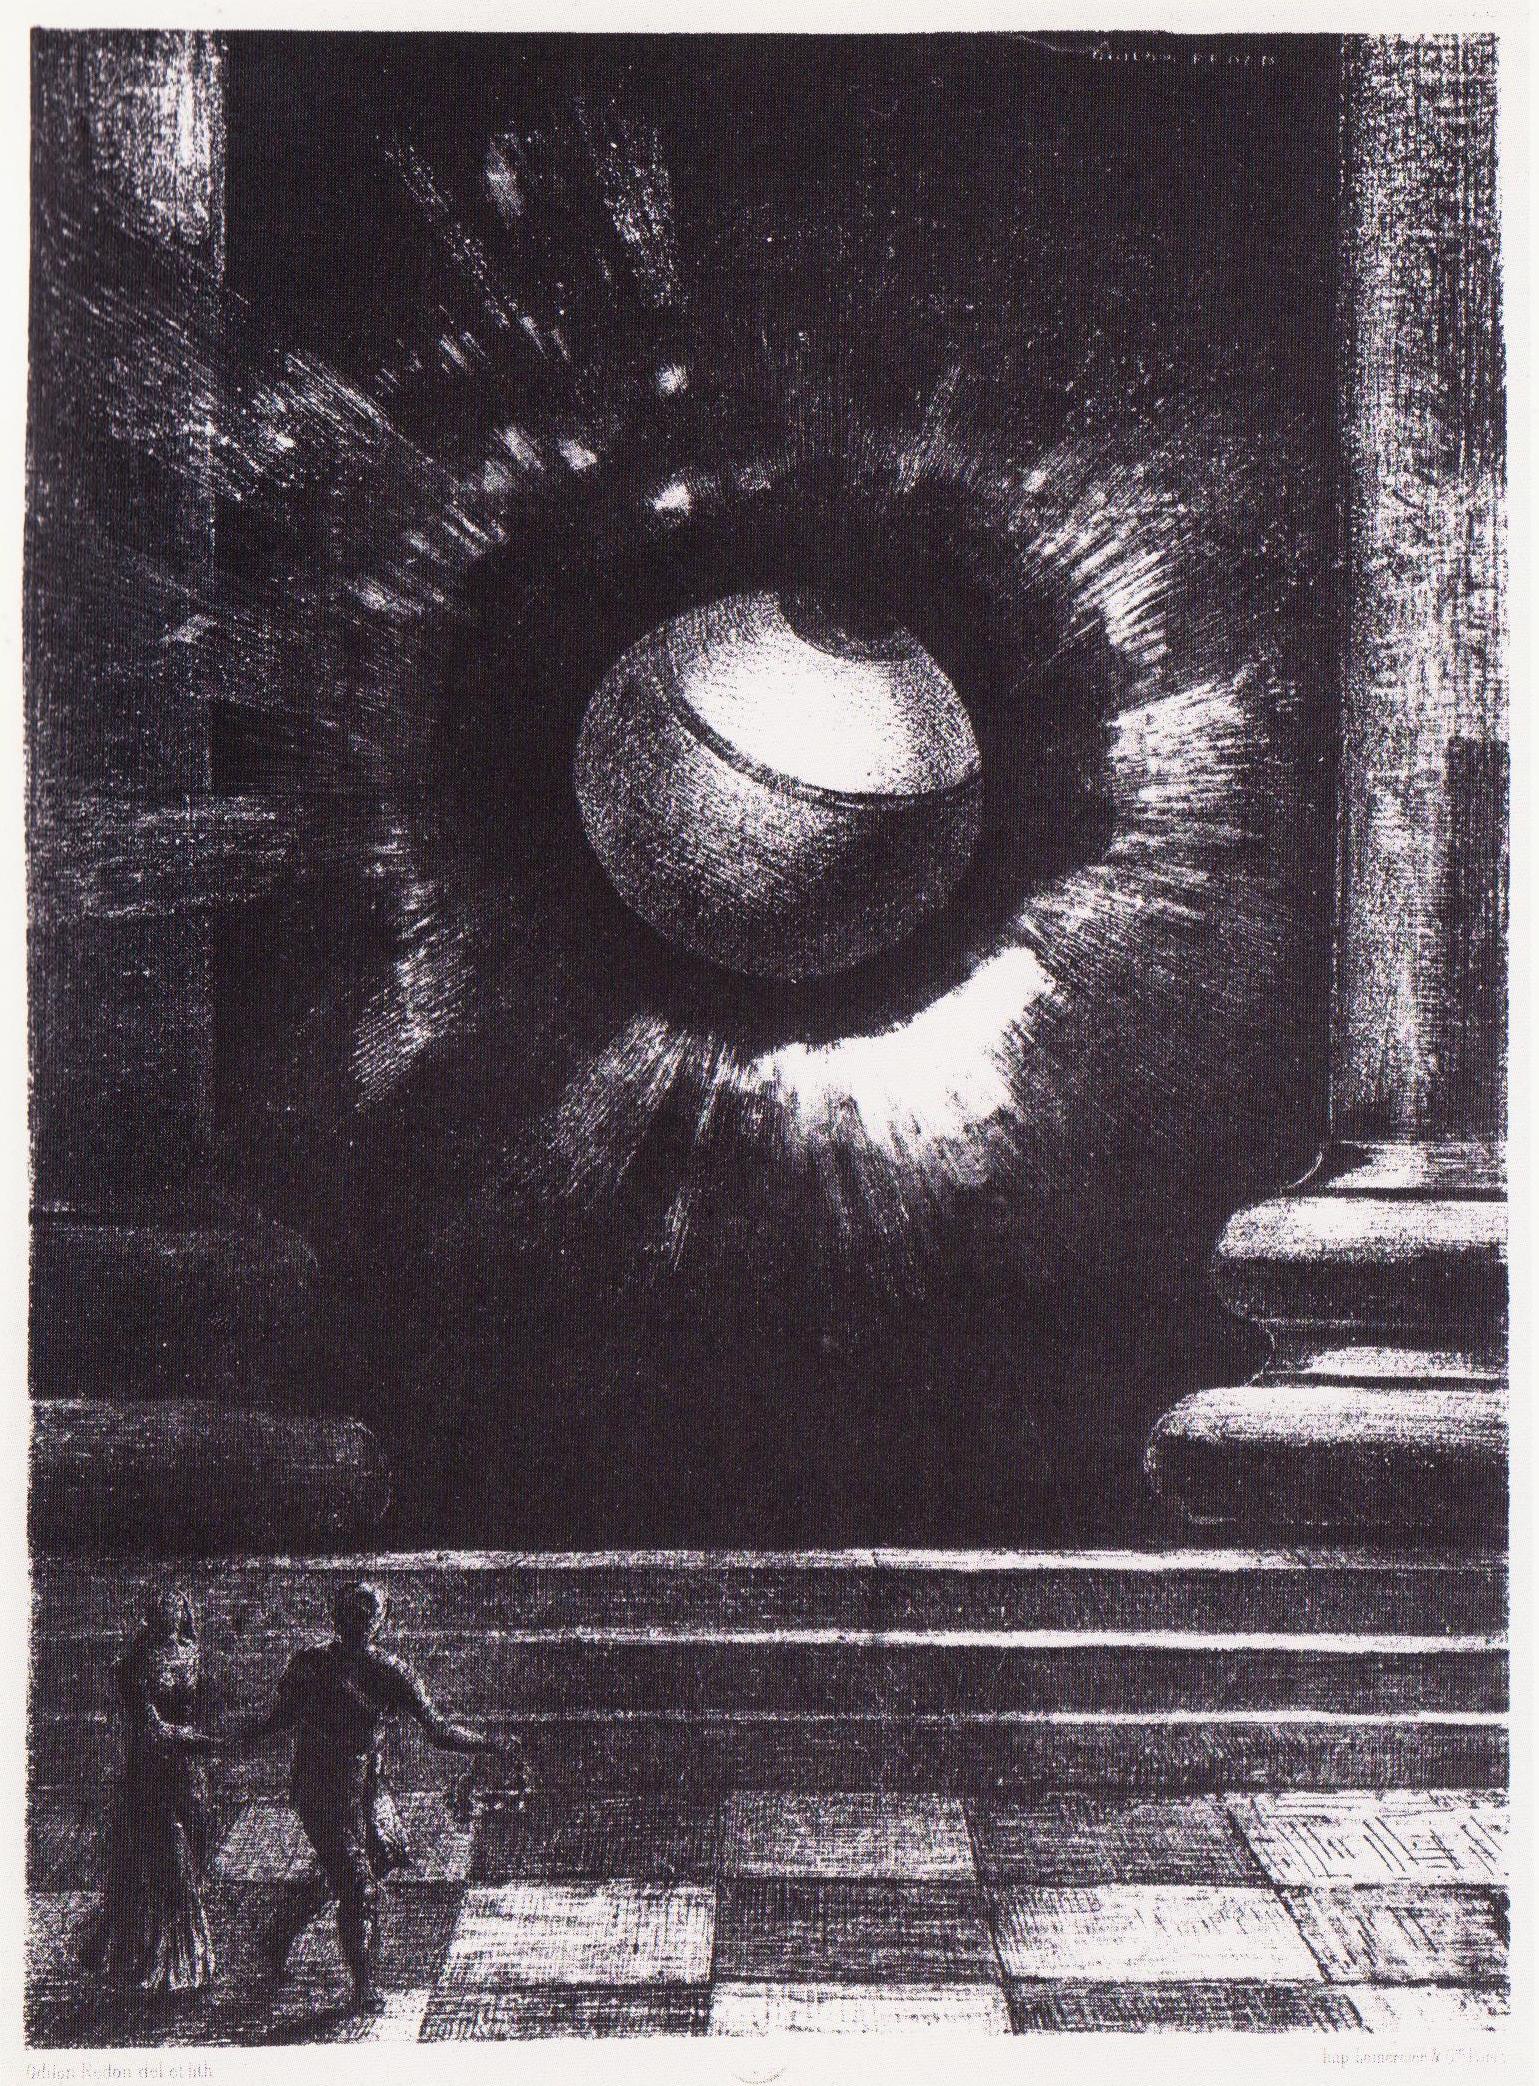 Vision by Odilon Redon - 1879 - 27.4 x 19.8 cm Art Institute of Chicago